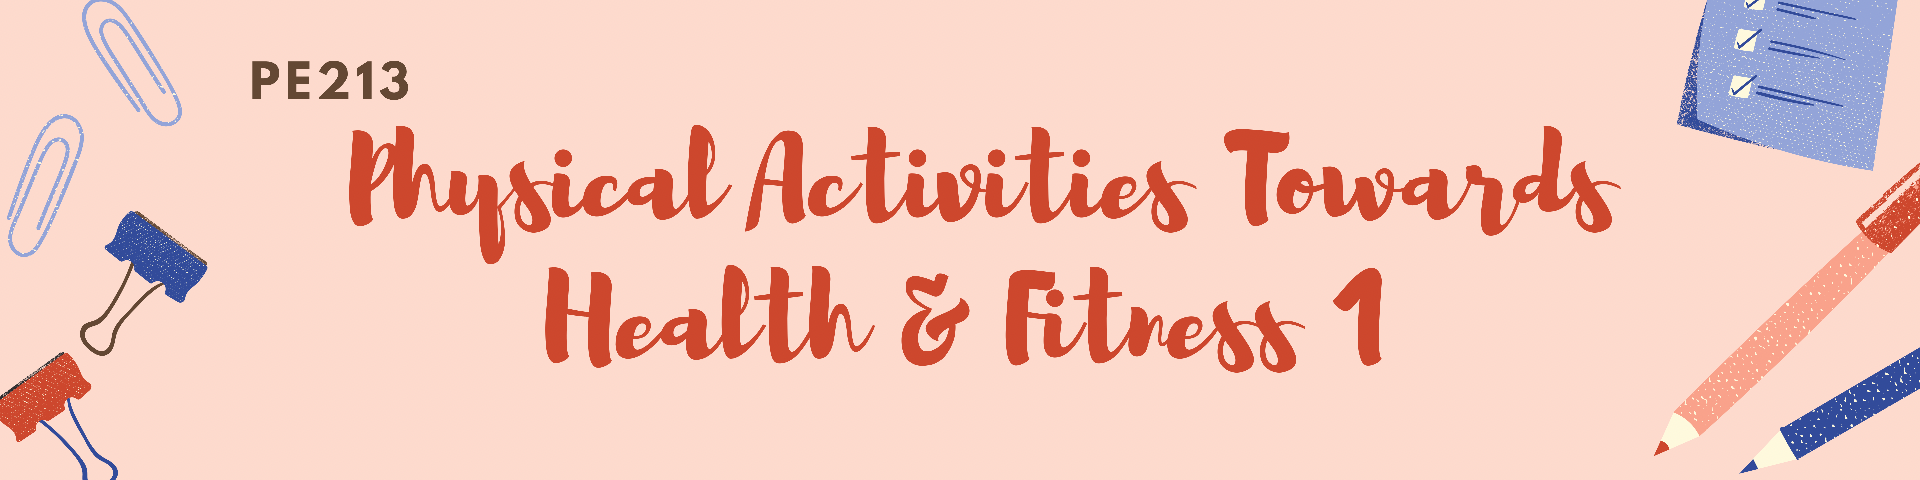 Physical Activities towards Health and Fitness I